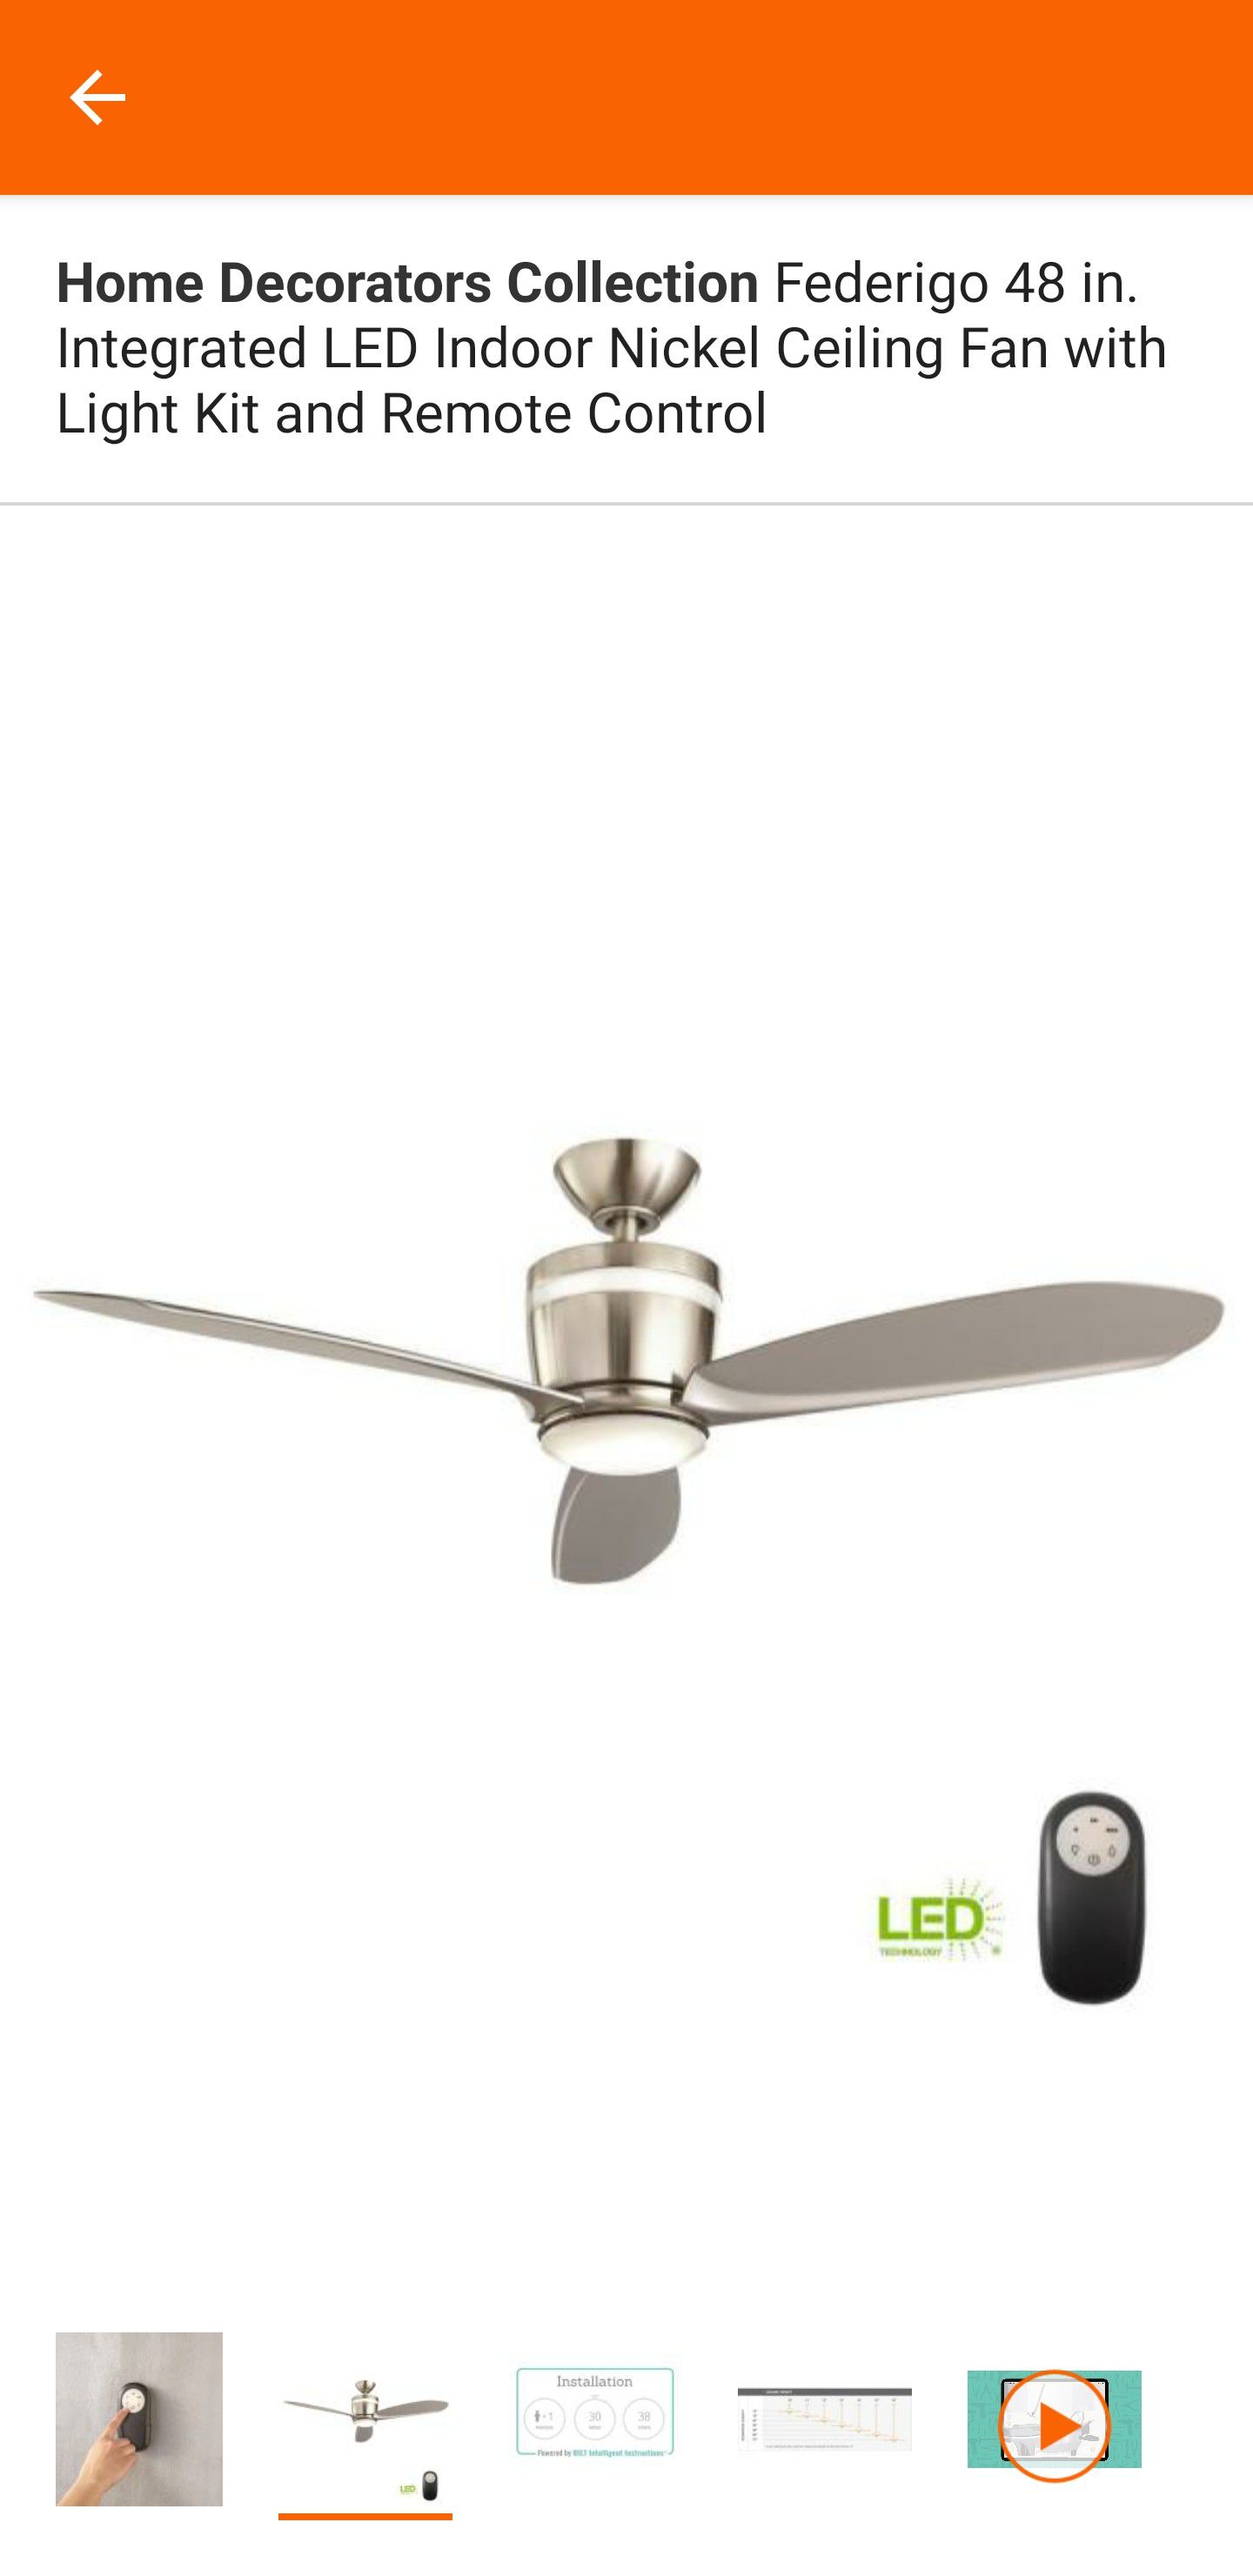 Home Decorators Collection Federigo 48 in. Integrated LED Indoor Nickel Ceiling Fan with Light Kit and Remote Control